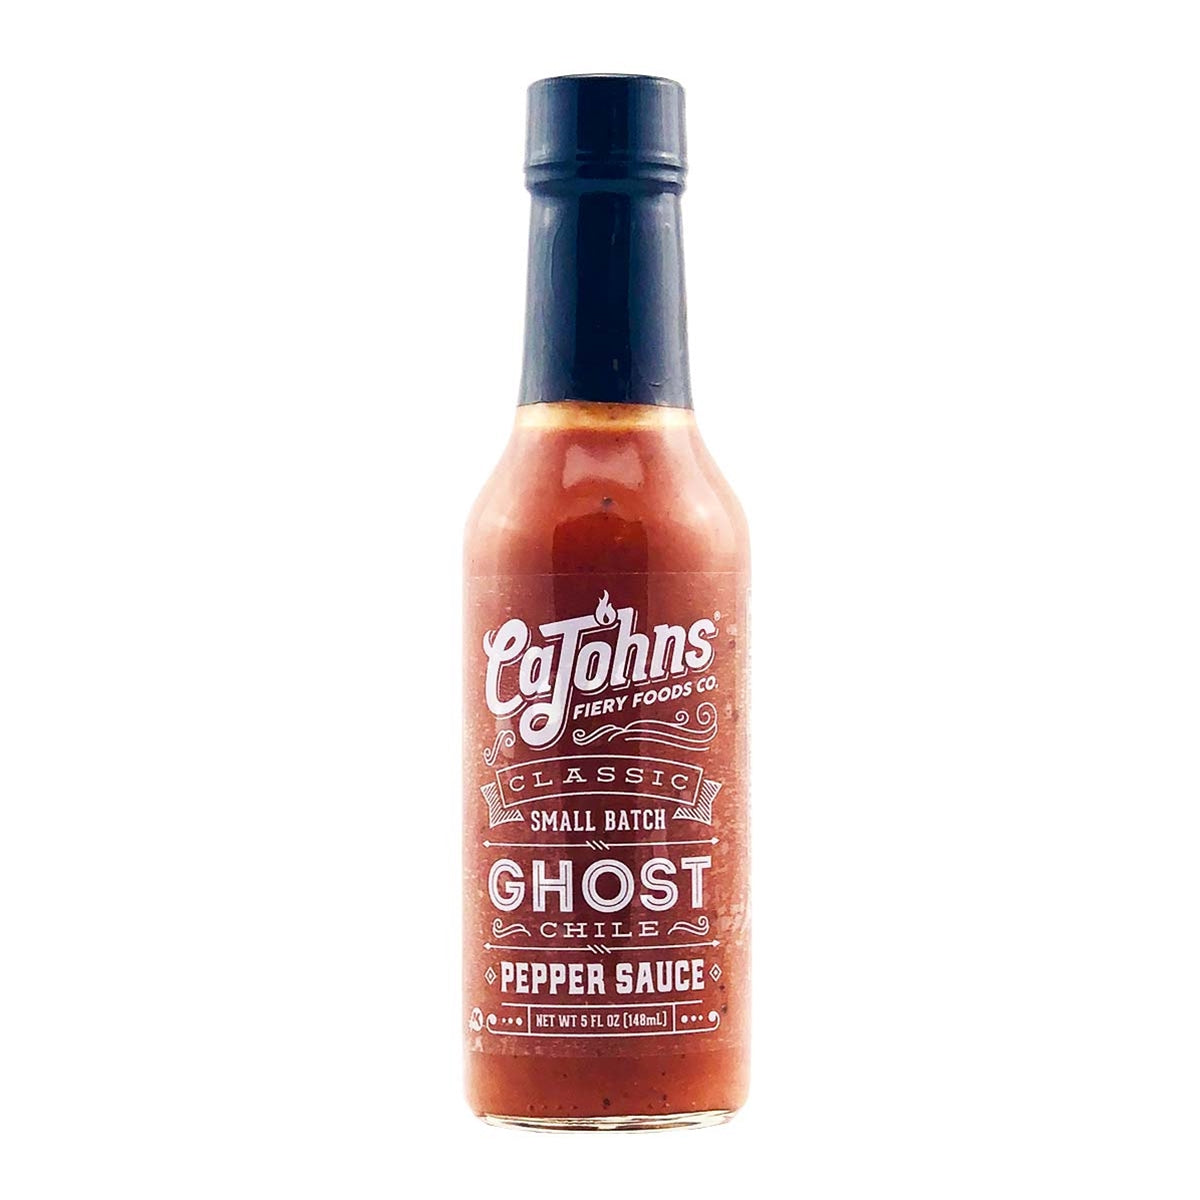 Hot Sauce CaJohns Small Batch Ghost Chile 5 oz Heat 6